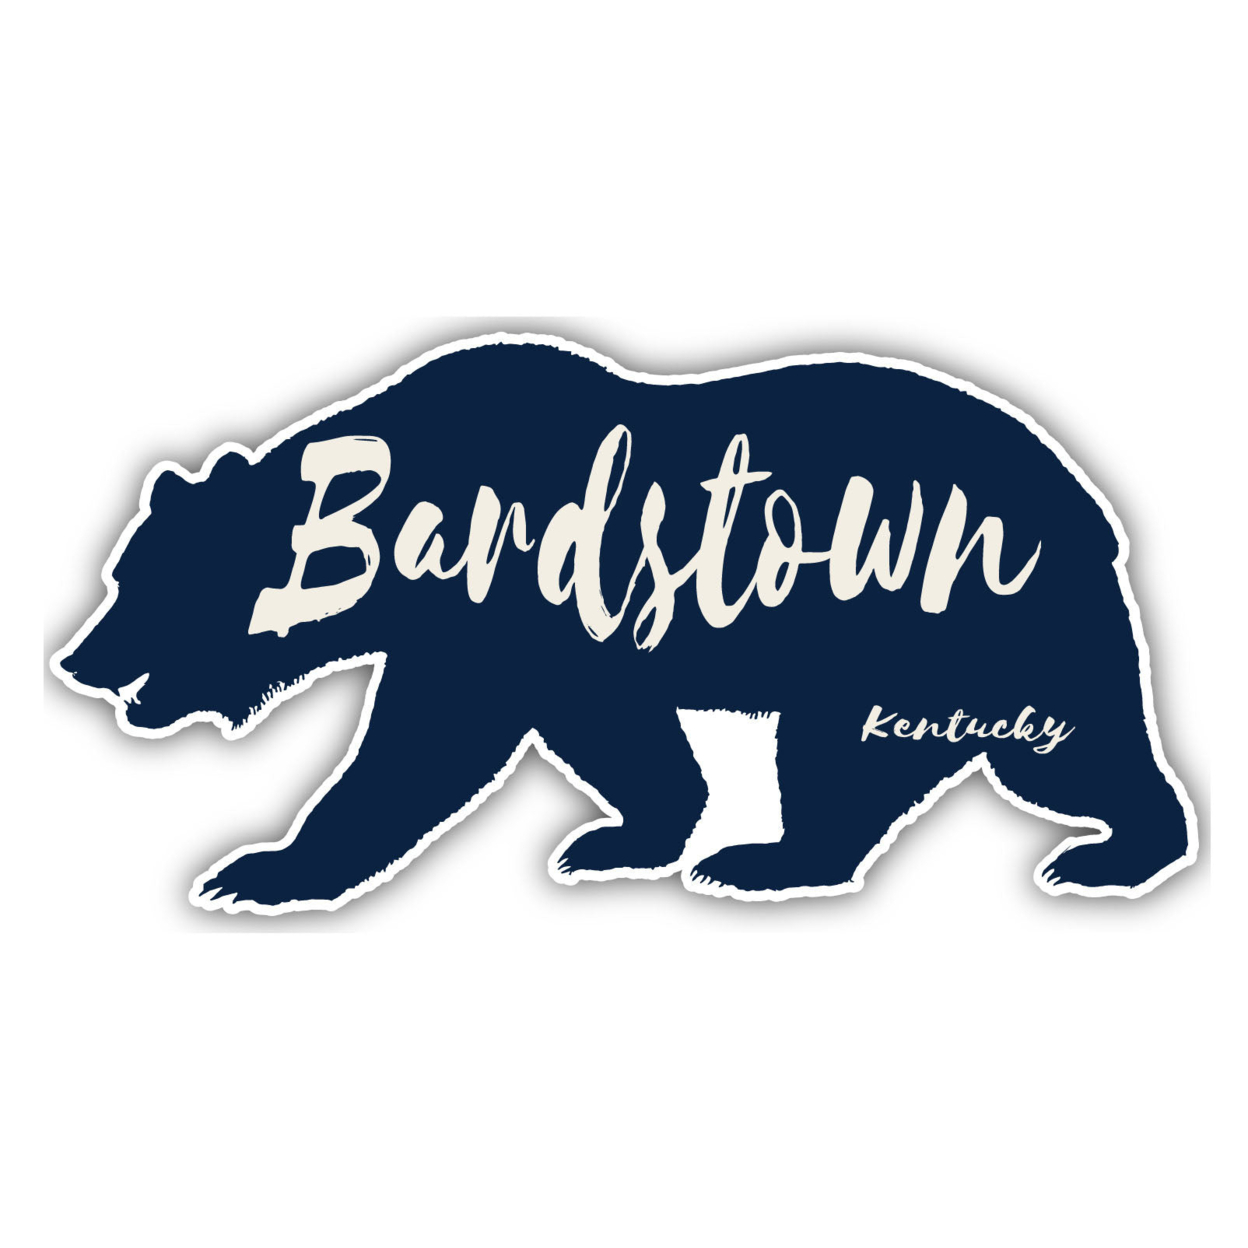 Bardstown Kentucky Souvenir Decorative Stickers (Choose Theme And Size) - 4-Pack, 2-Inch, Great Outdoors